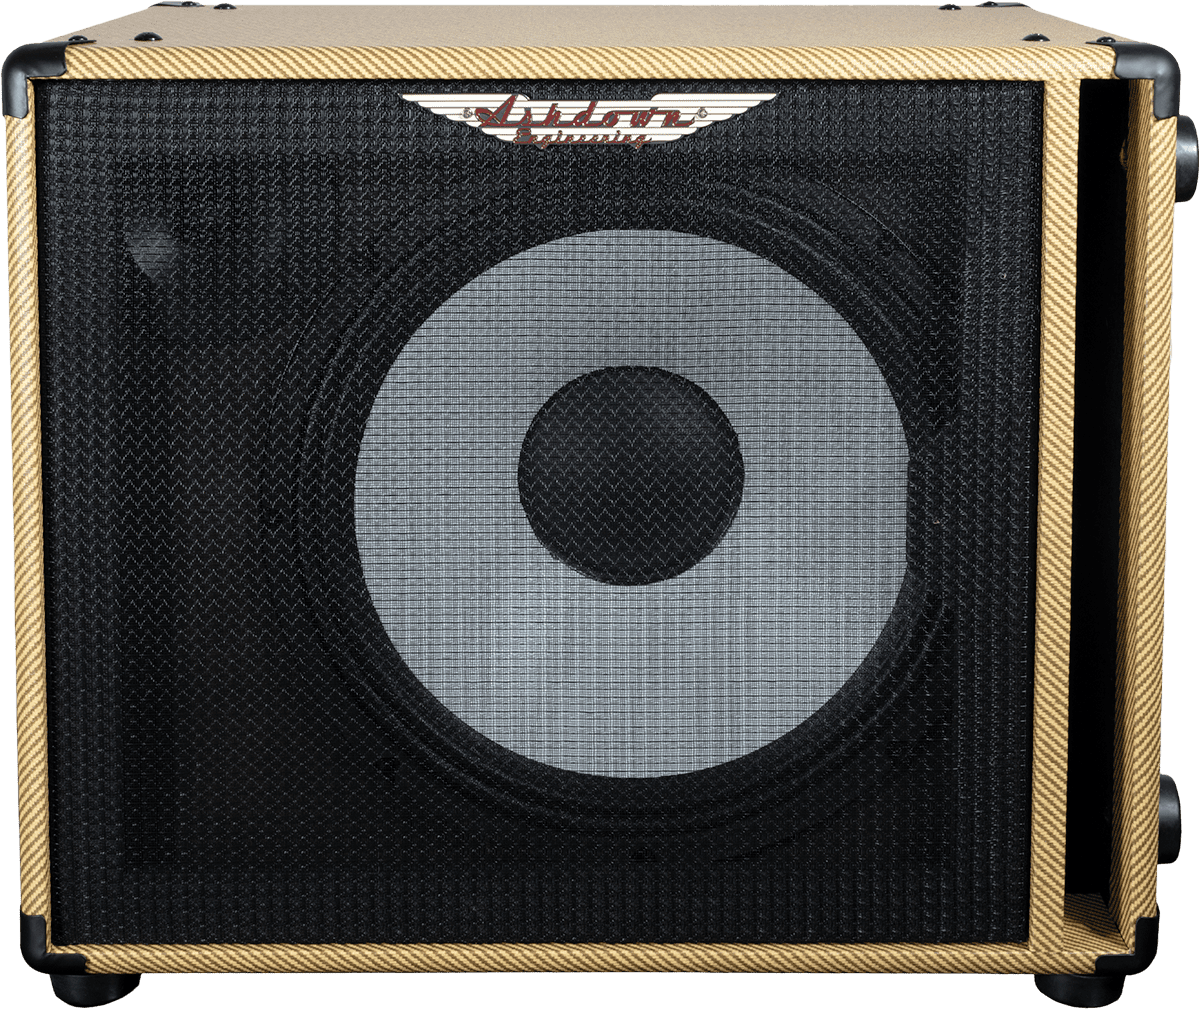 Ashdown Ctm 112 Tweed 300w - Bass amp cabinet - Main picture